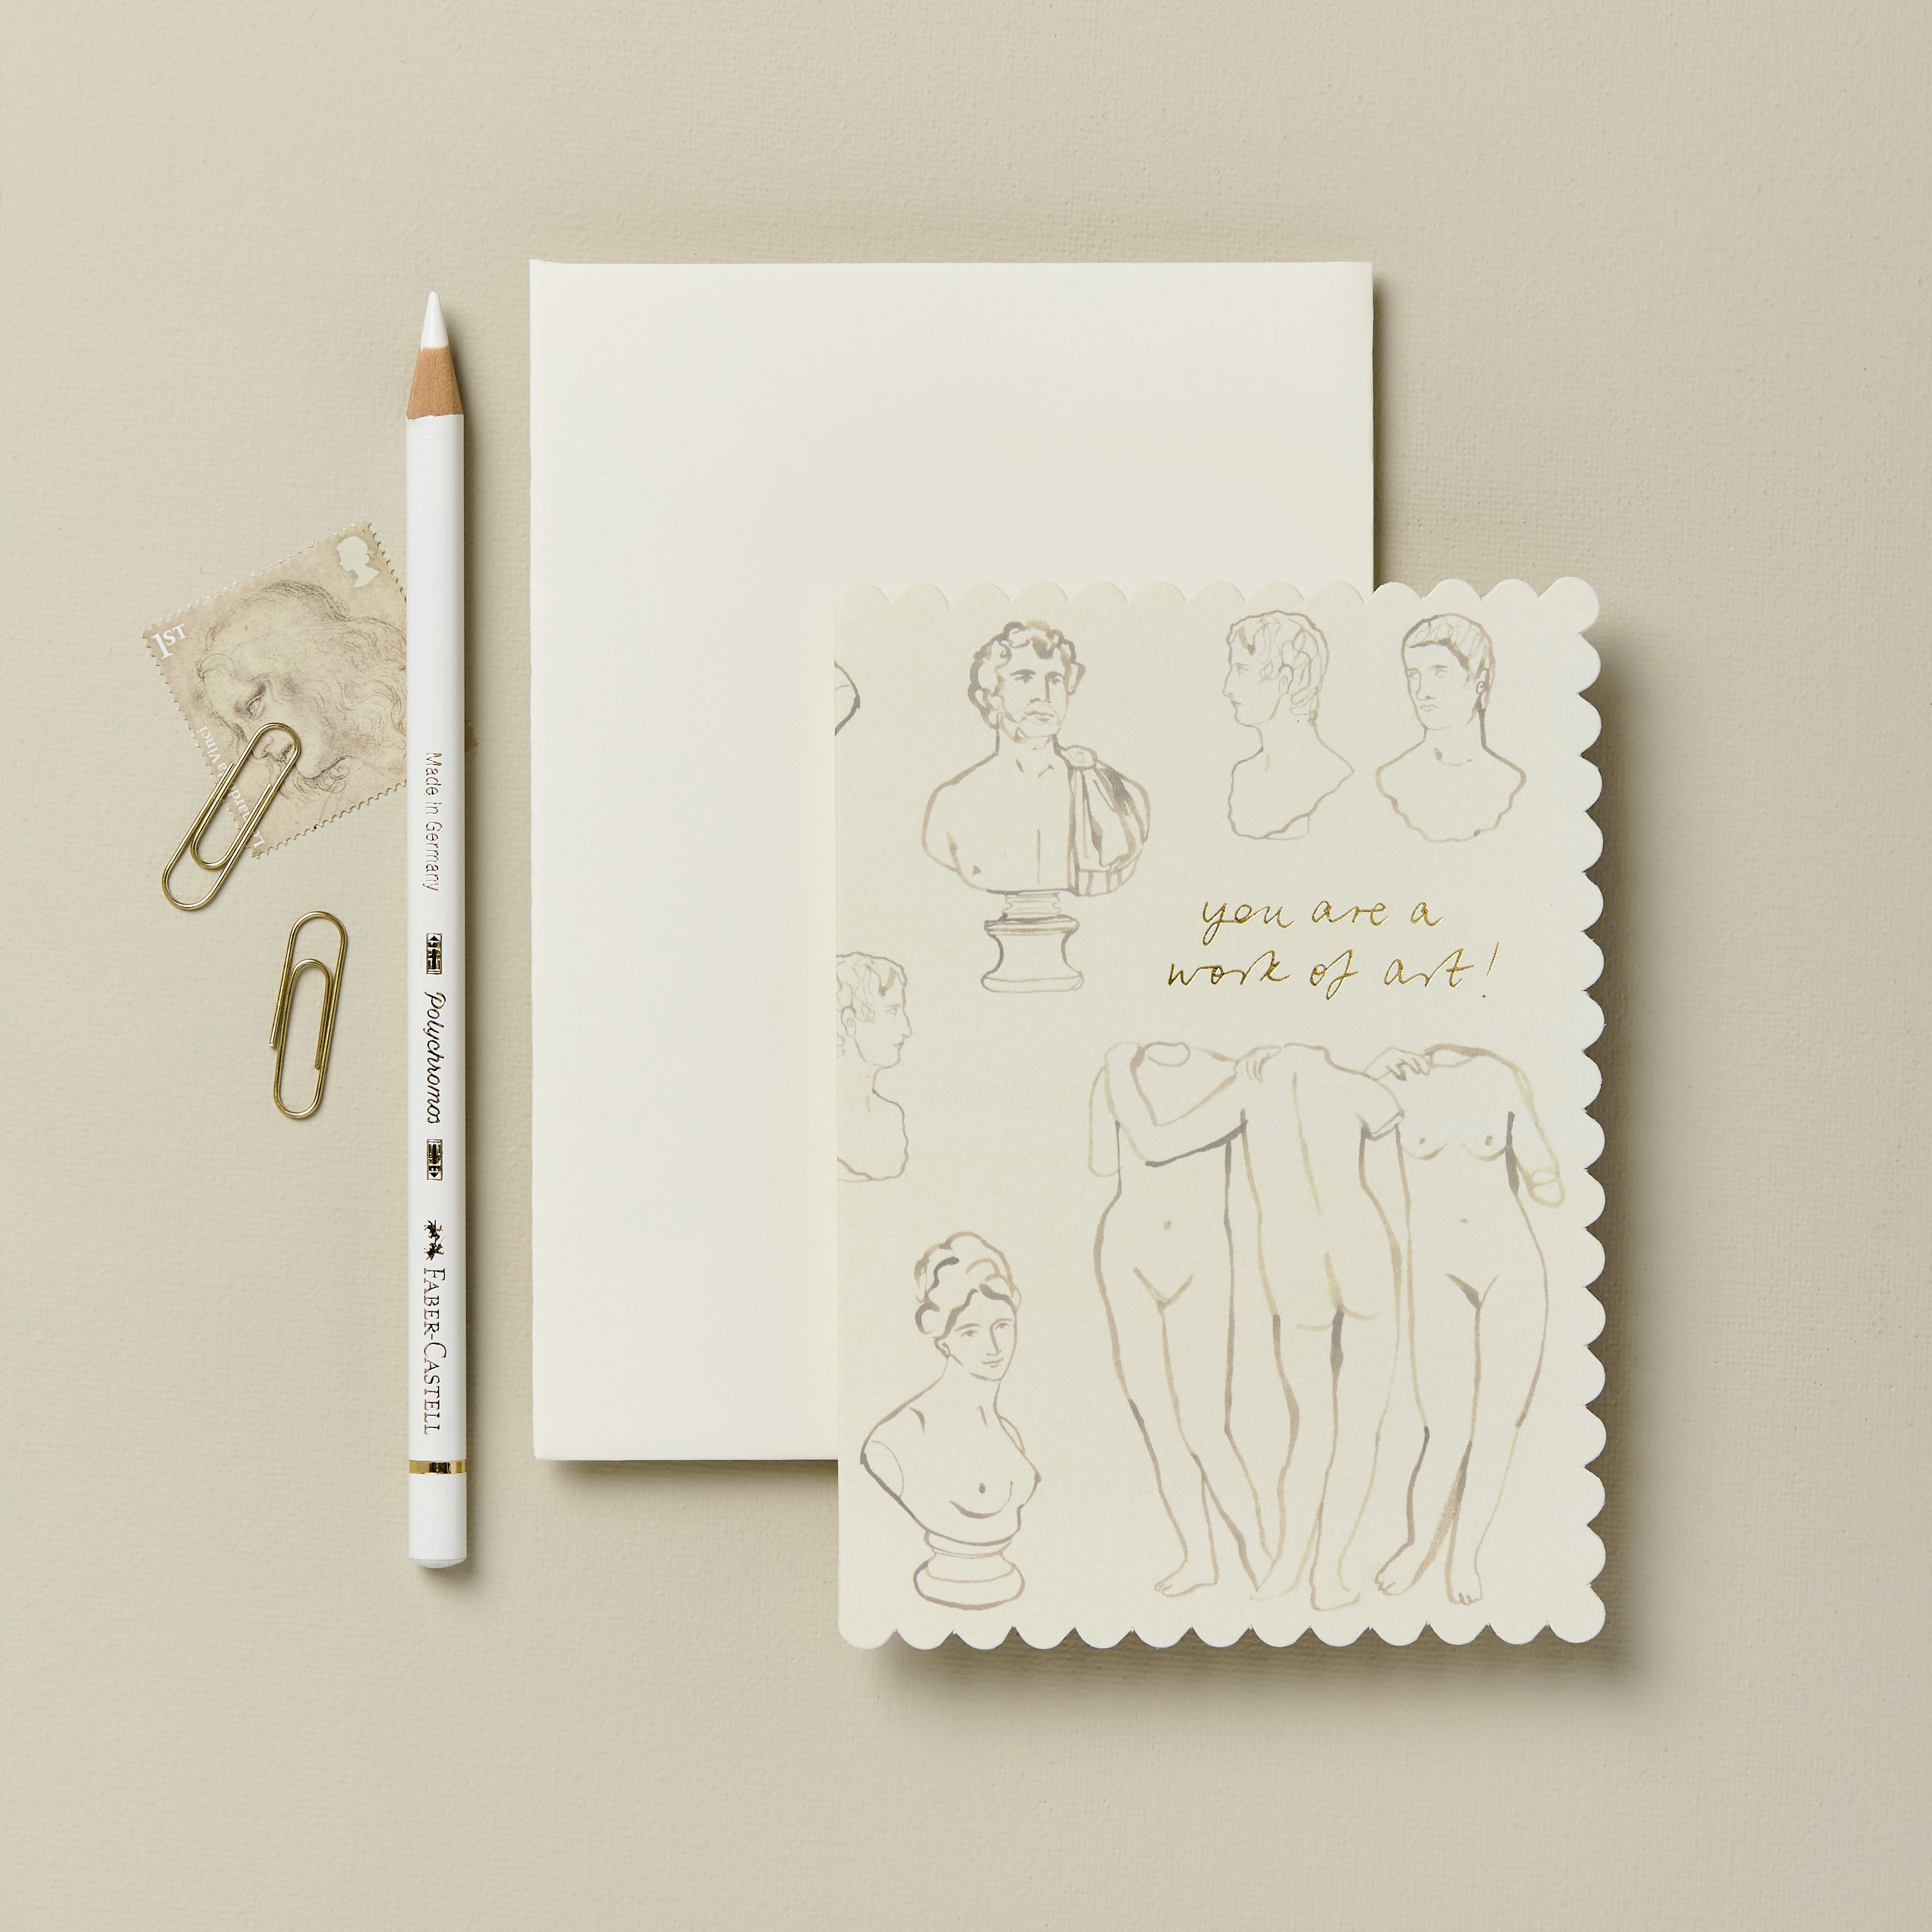 'You Are A Work Of Art' Statues Greetings Card